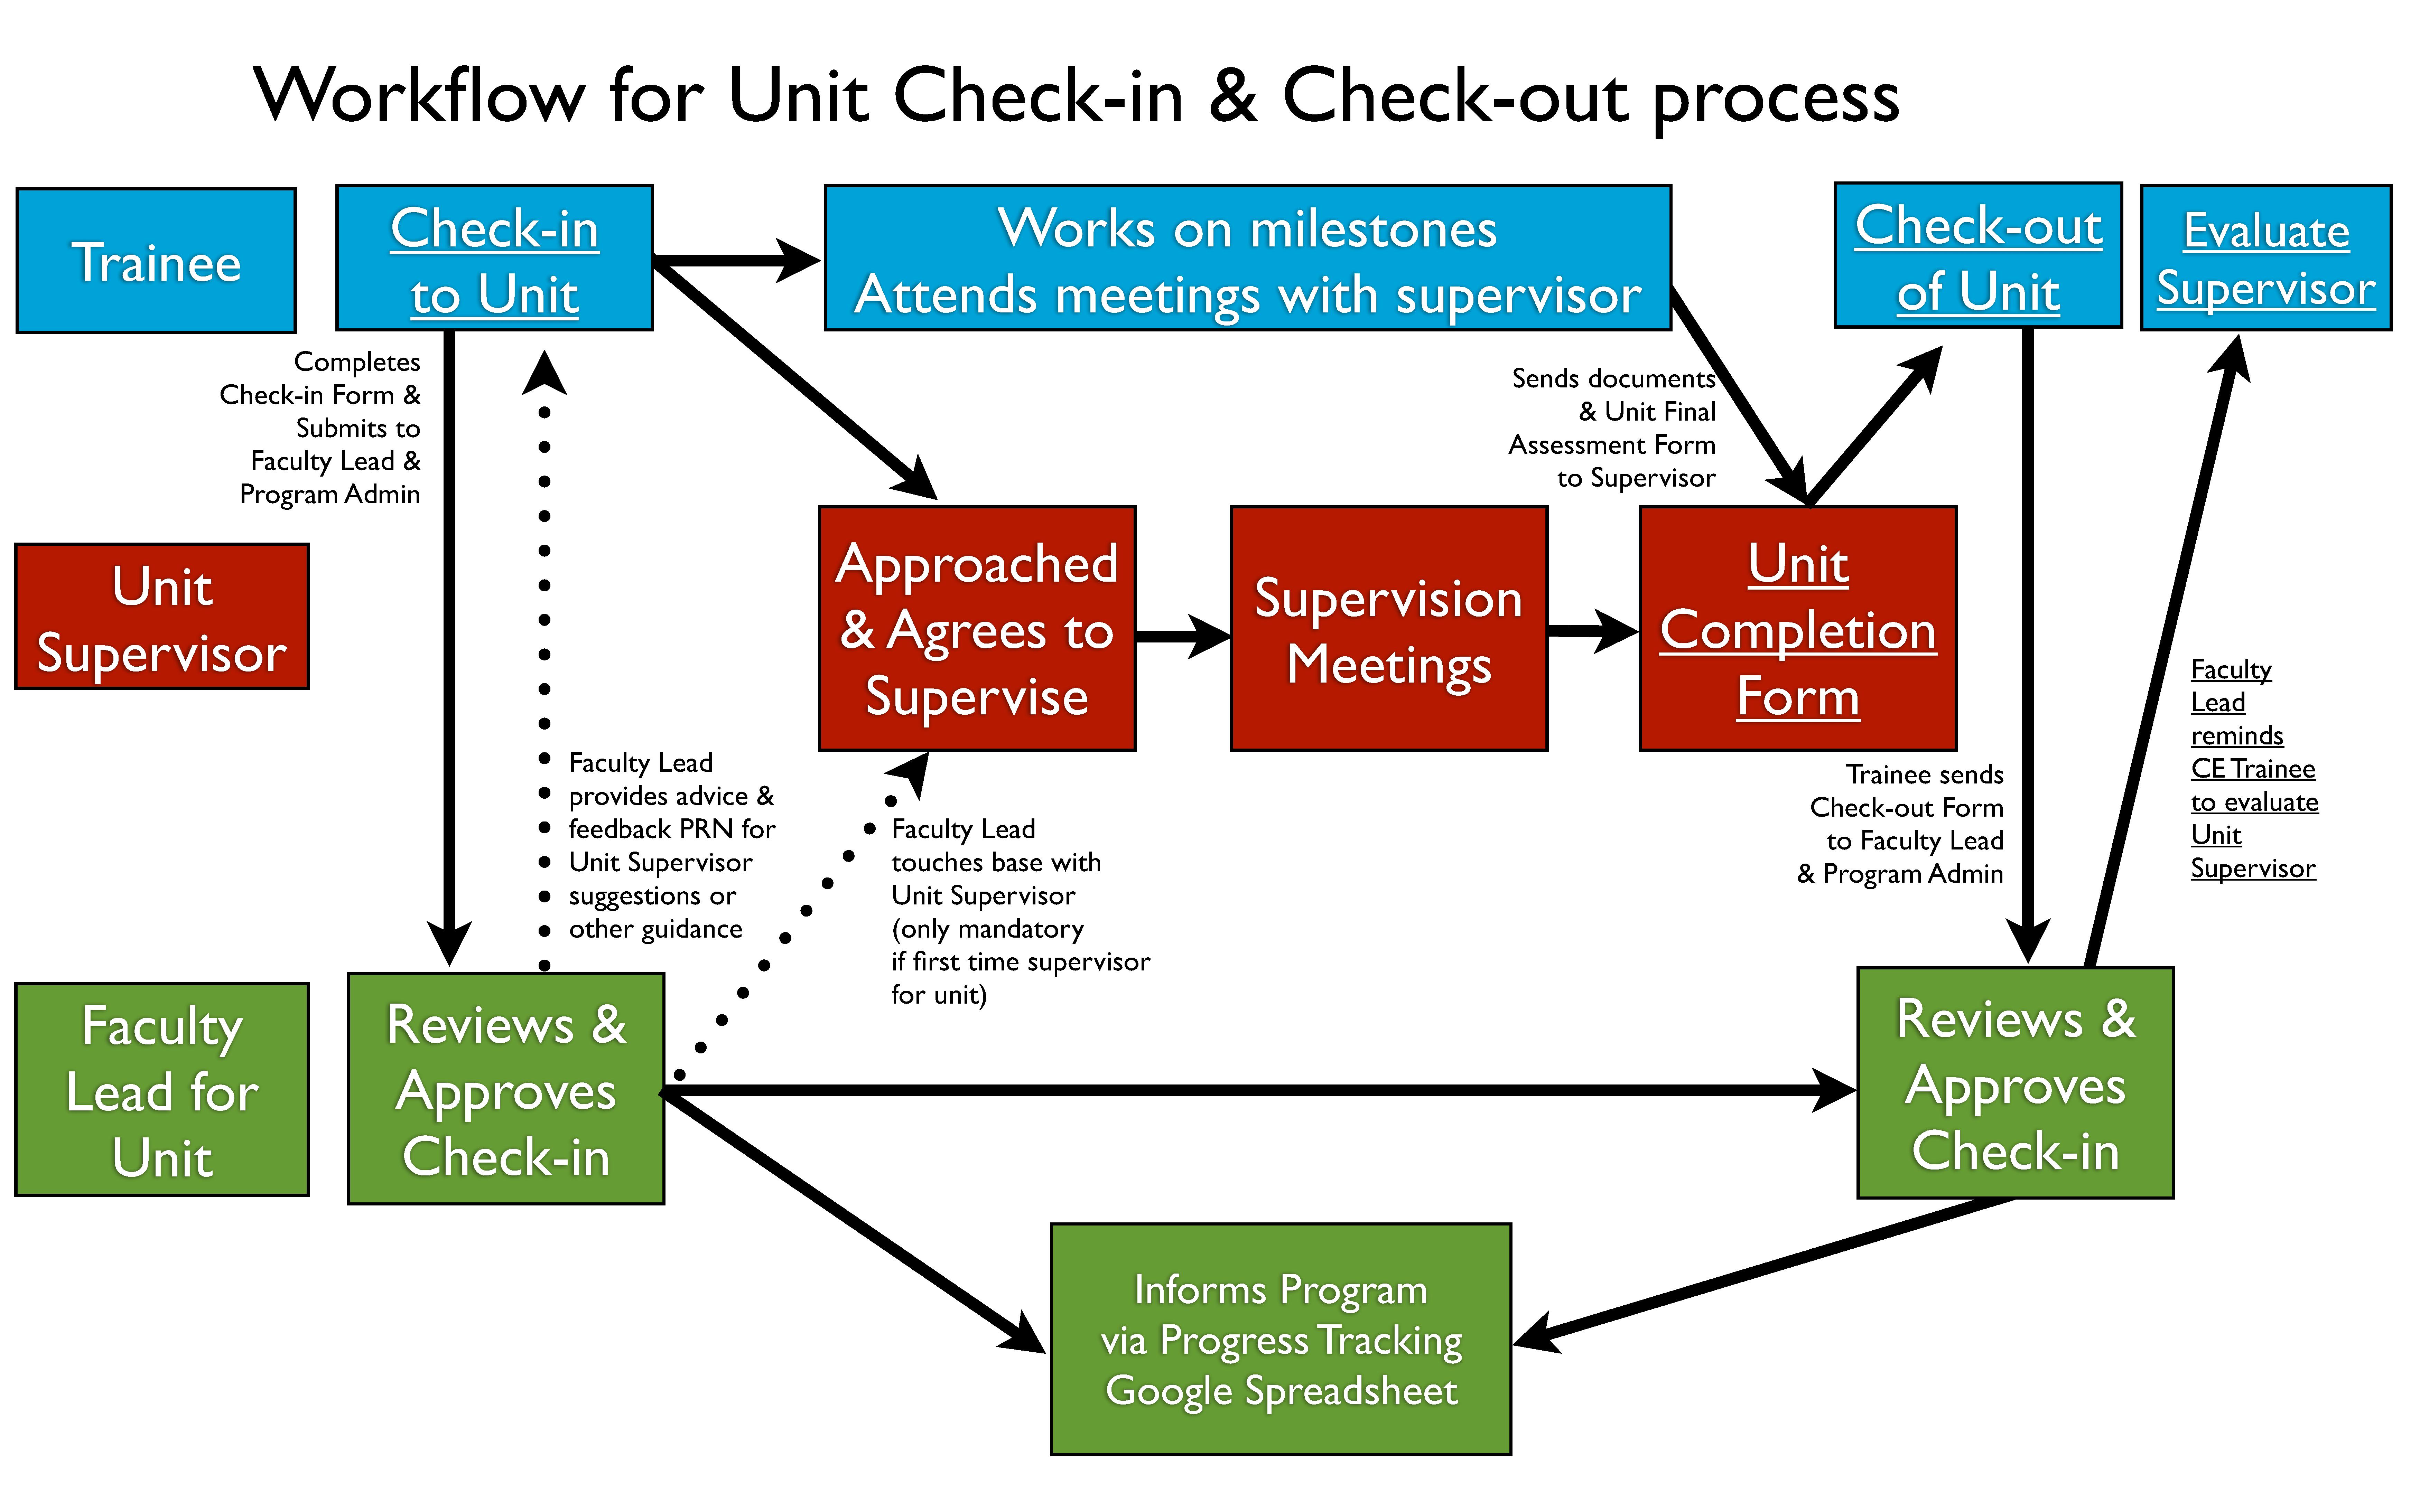 workflow-for-unit-check-in--check-out-process-2.jpg